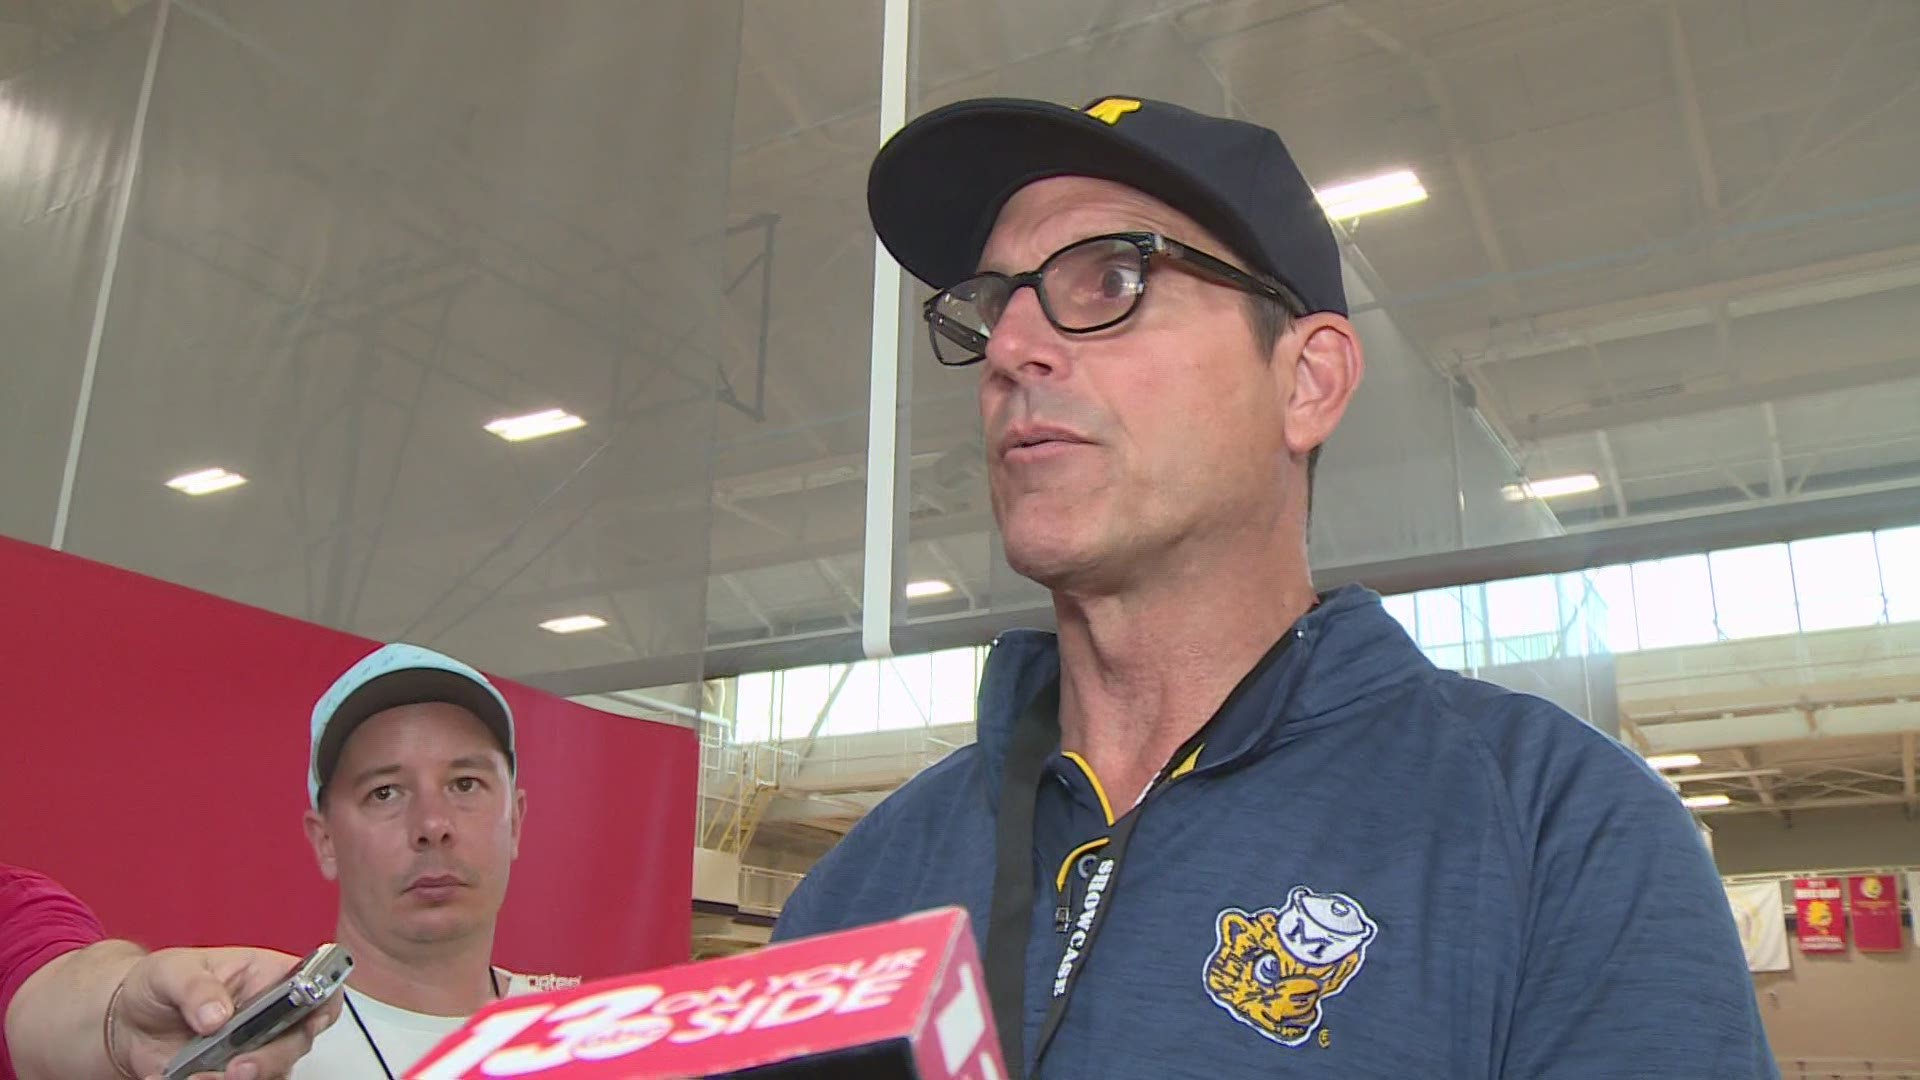 Harbaugh addressed allegations against Schembechler that said he ignored inappropriate sexual behavior by a former team physician.